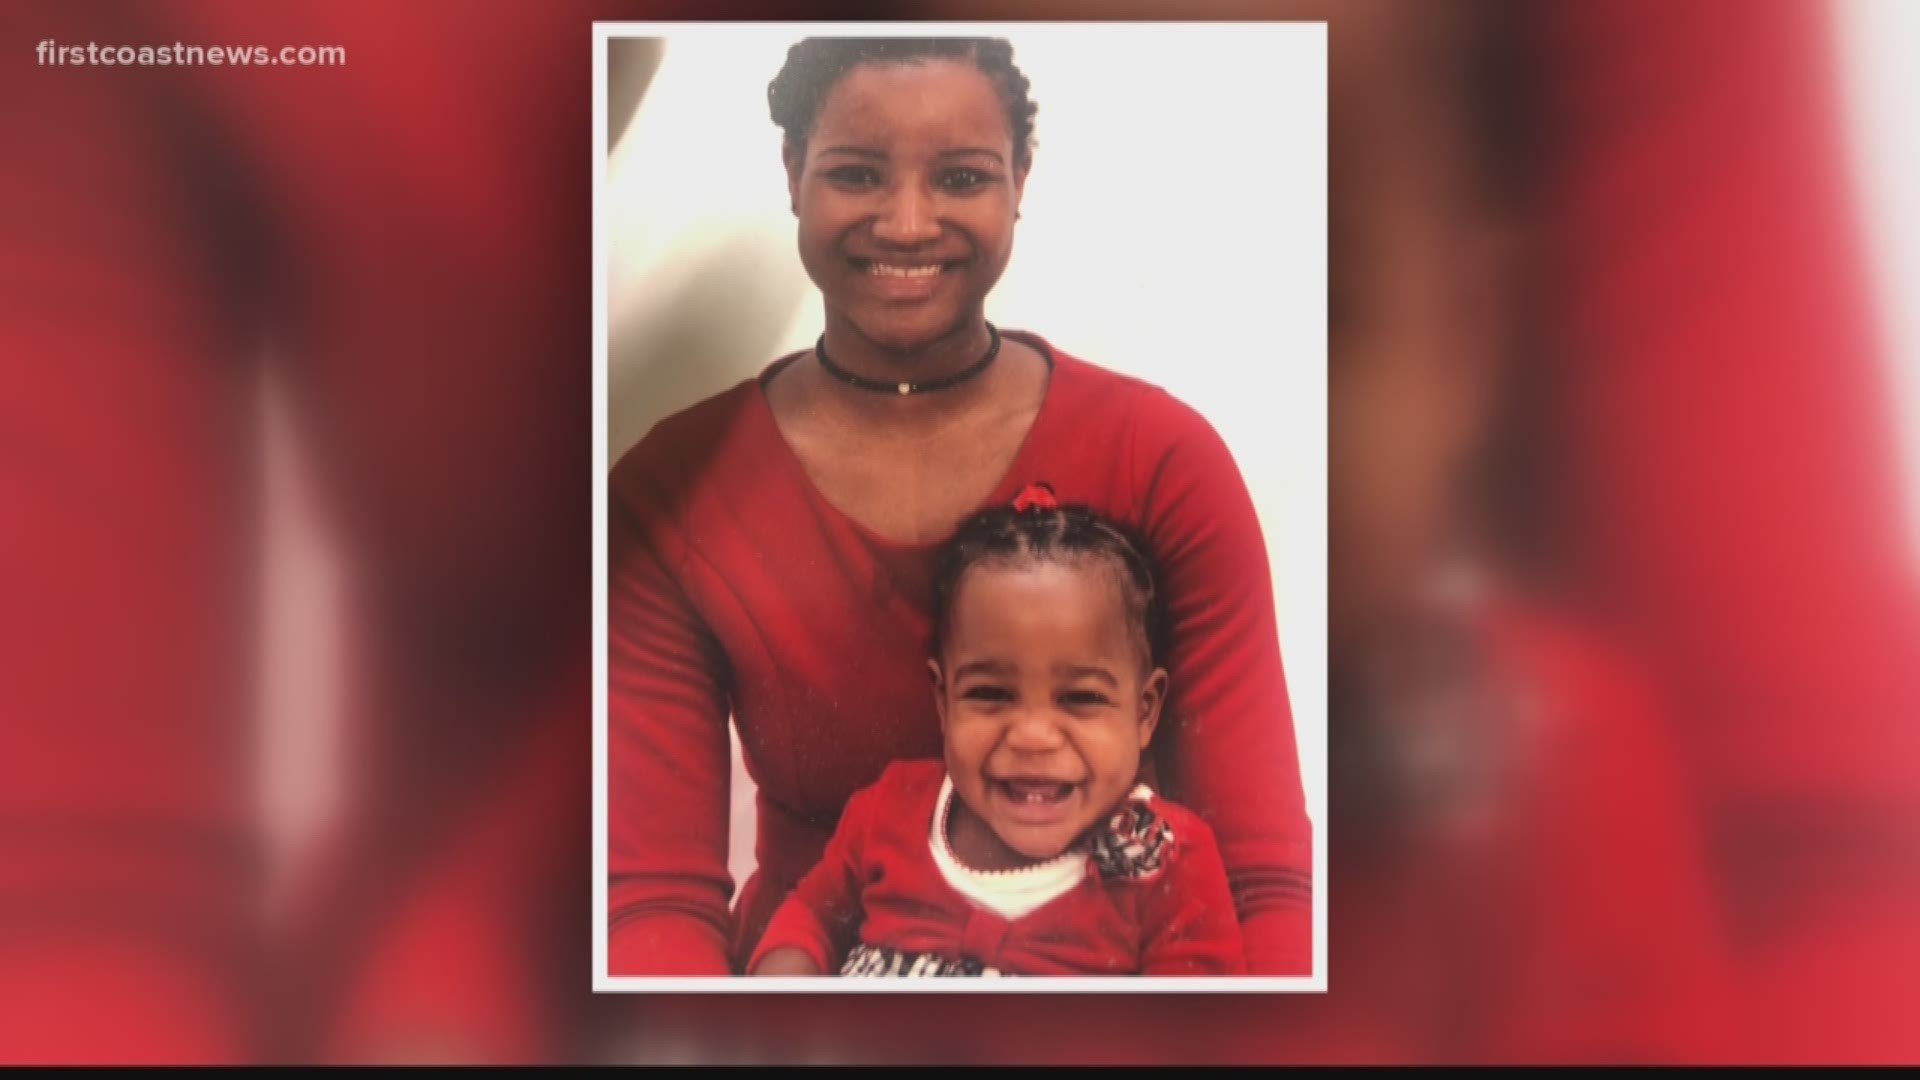 Relatives say the mother of missing 5-year-old Taylor Williams is on life support, while investigators tell First Coast News she is in a medically-induced coma.